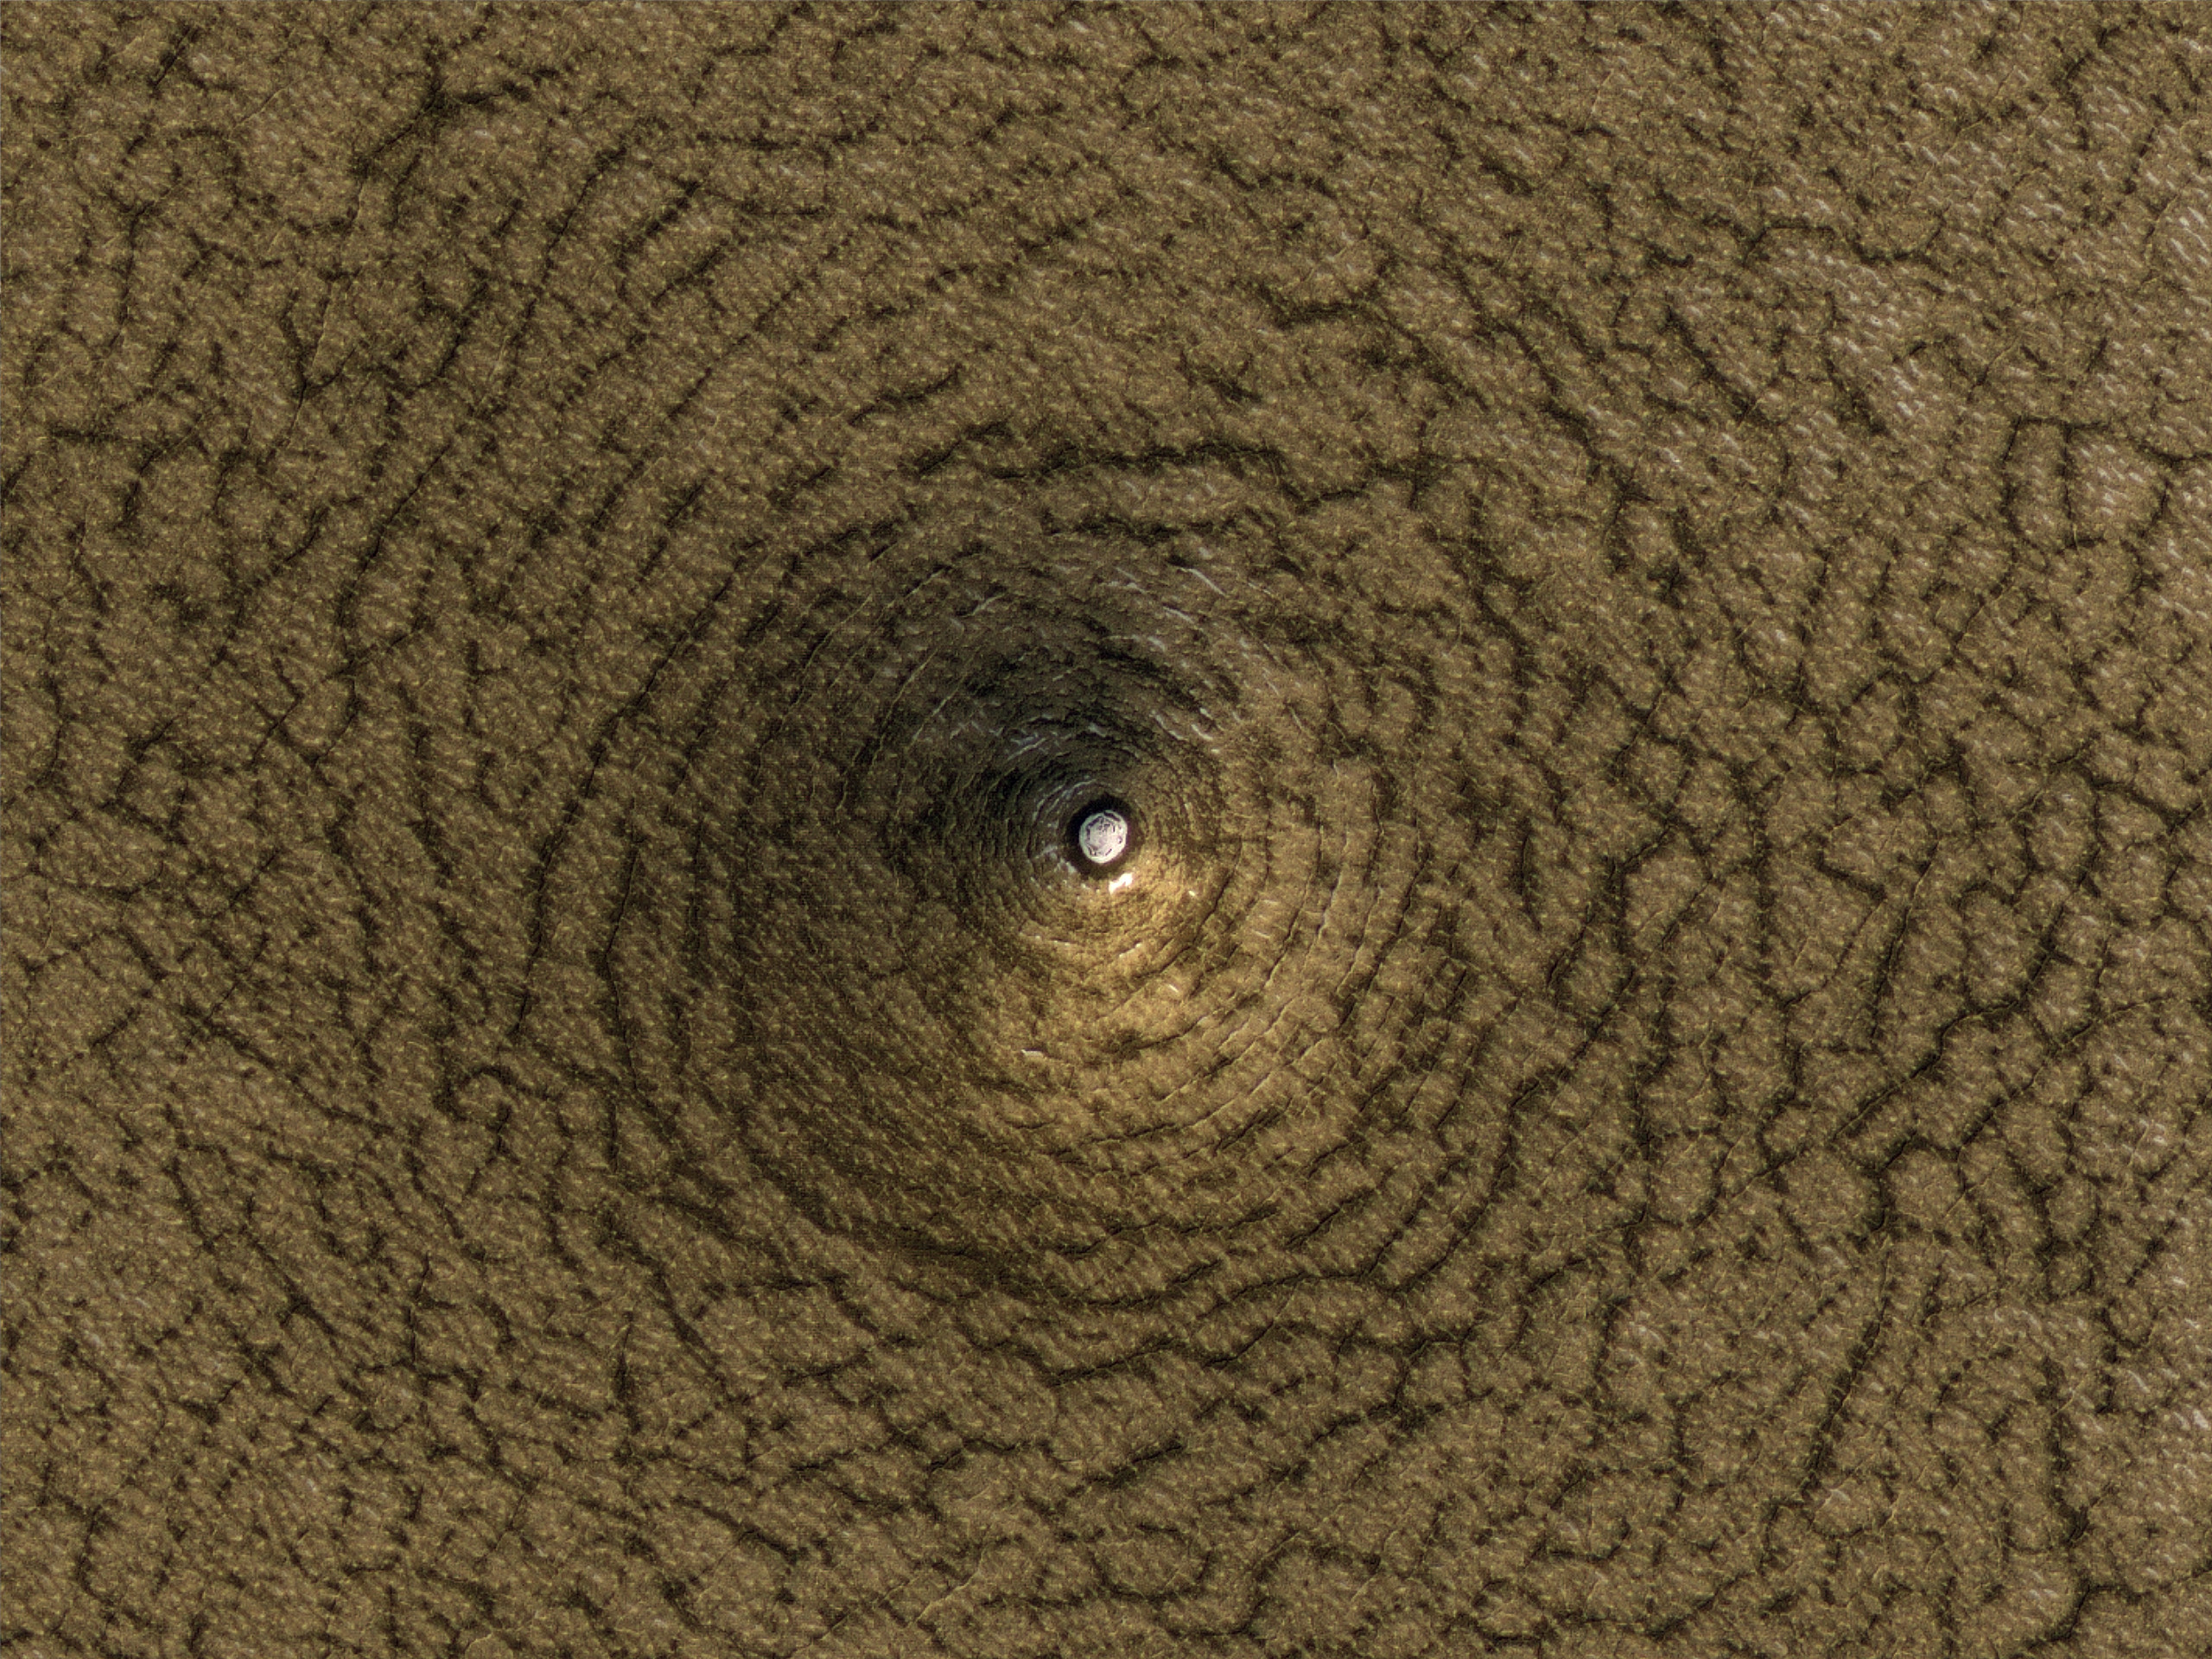 A Cone-Shaped Pit on South Polar Deposits